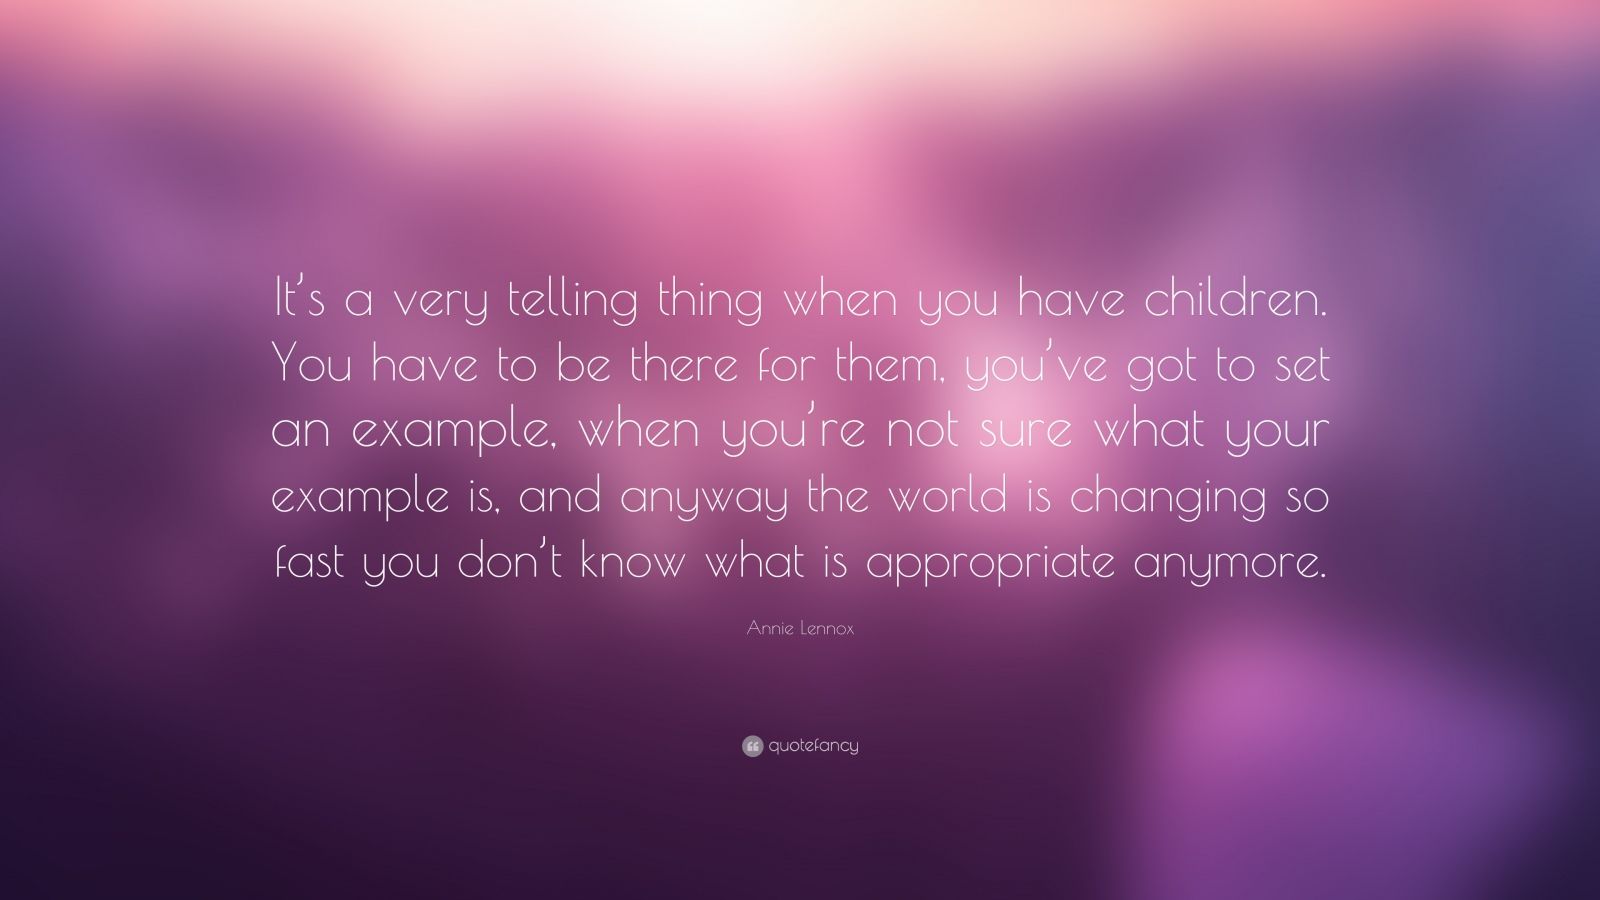 Annie Lennox Quote: “It’s a very telling thing when you have children ...